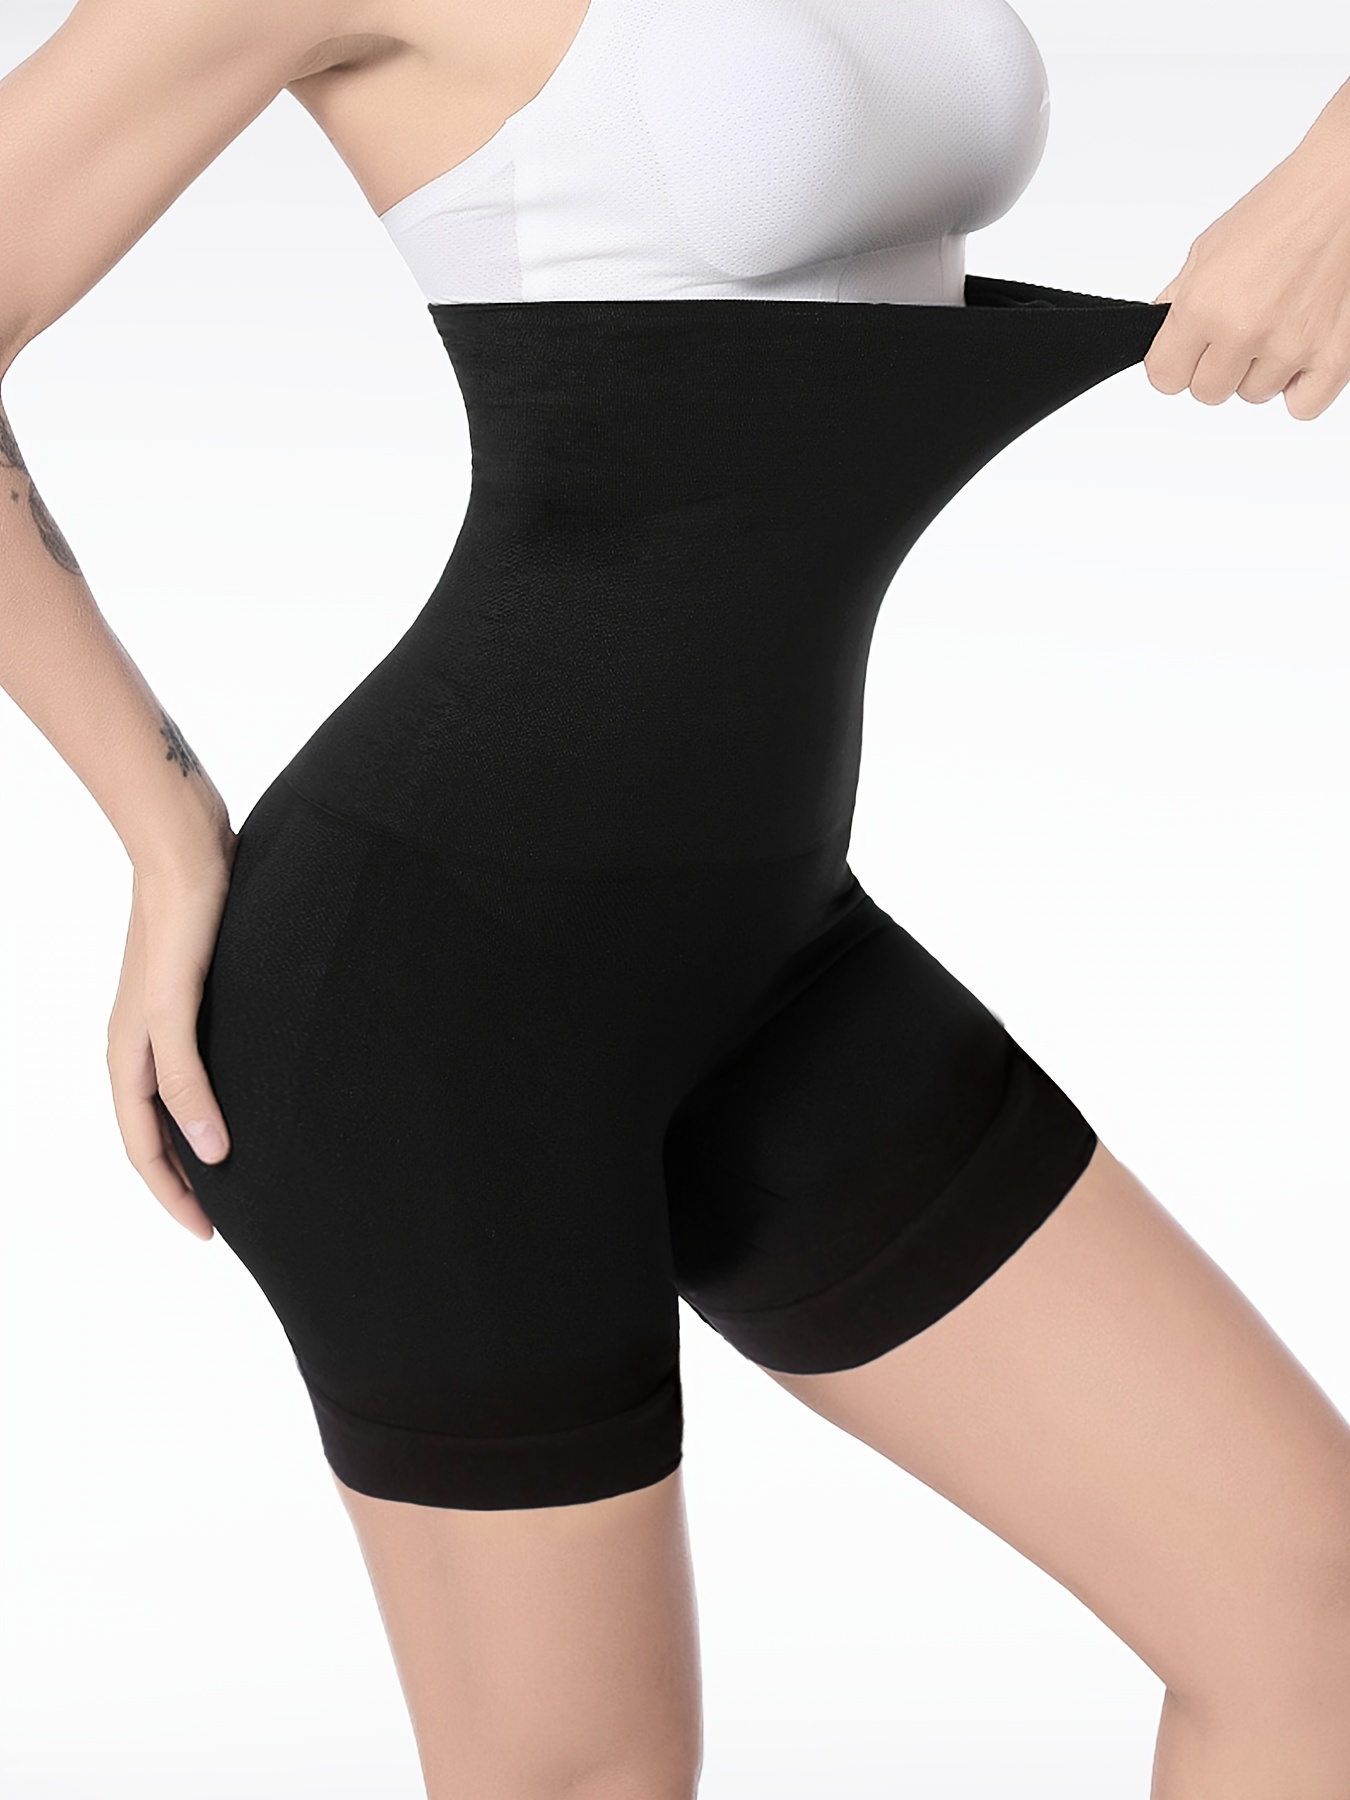 Women's Smoothing Shapewear with Thigh and Tummy Control